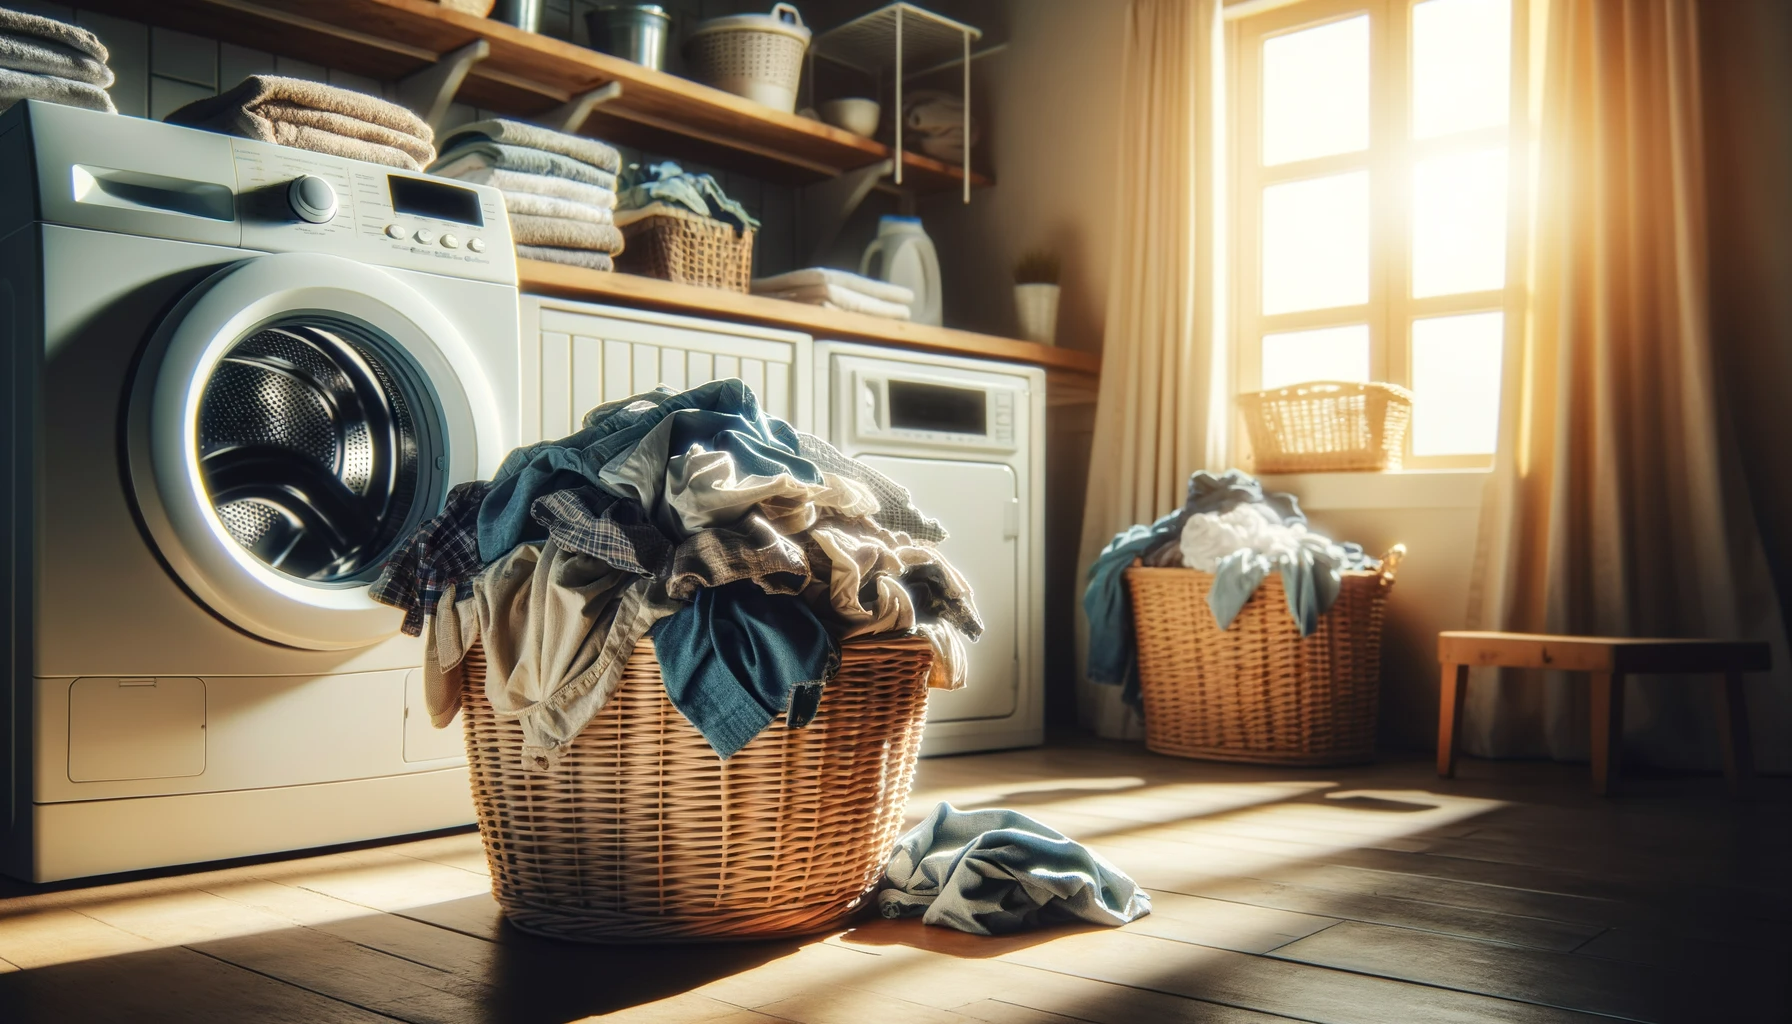 How often should you wash your clothes? Jeans, underwear, socks